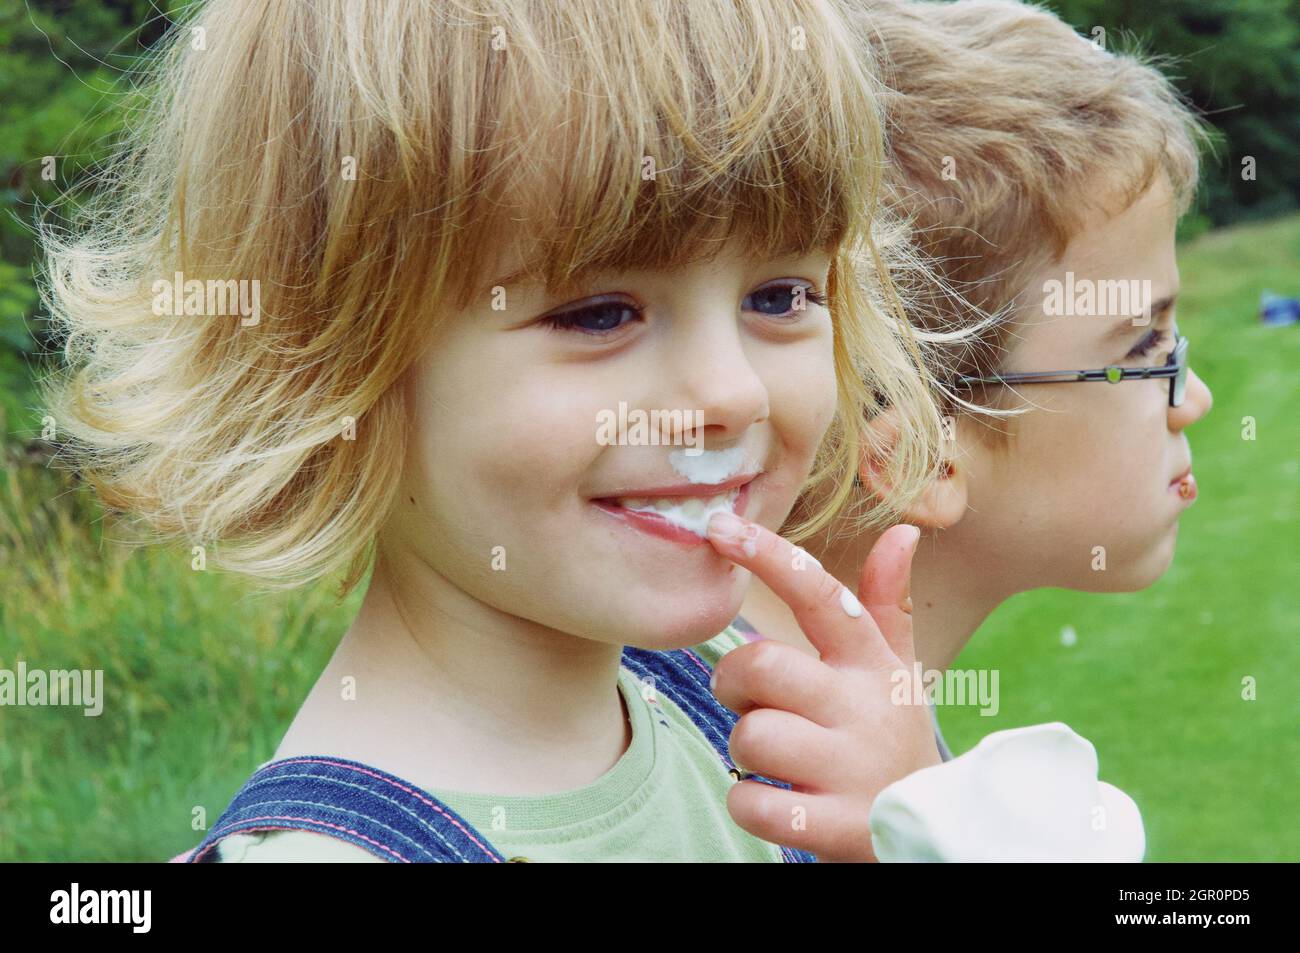 Portrait Of Cute Smiling Girl Holding Ice Cream Stock Photo